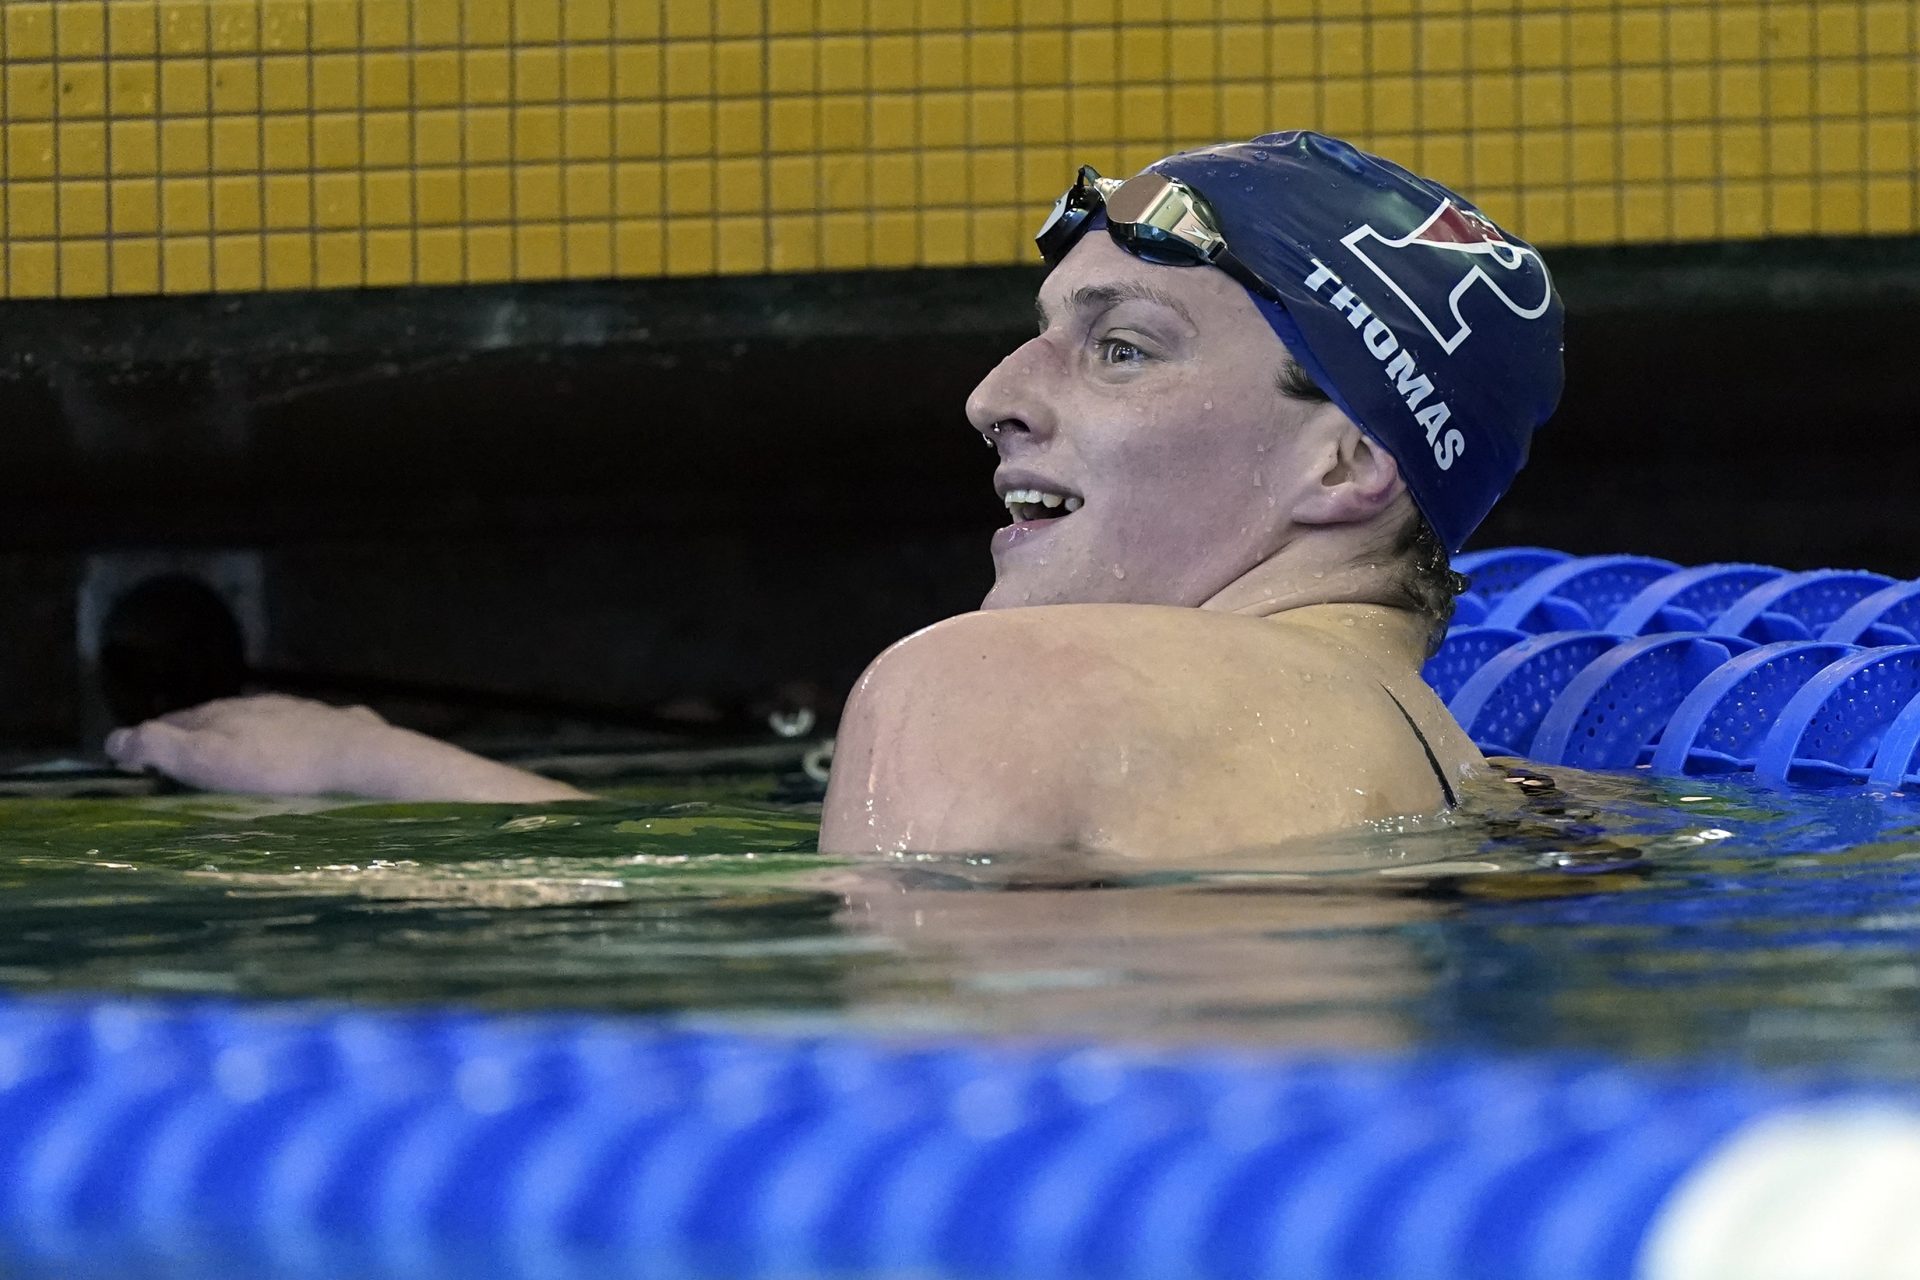 Pennsylvania's Lia Thomas smiles after winning a preliminary heat in the 500-yard freestyle at the NCAA women's swimming and diving championships Thursday, March 17, 2022, in at Georgia Tech in Atlanta.